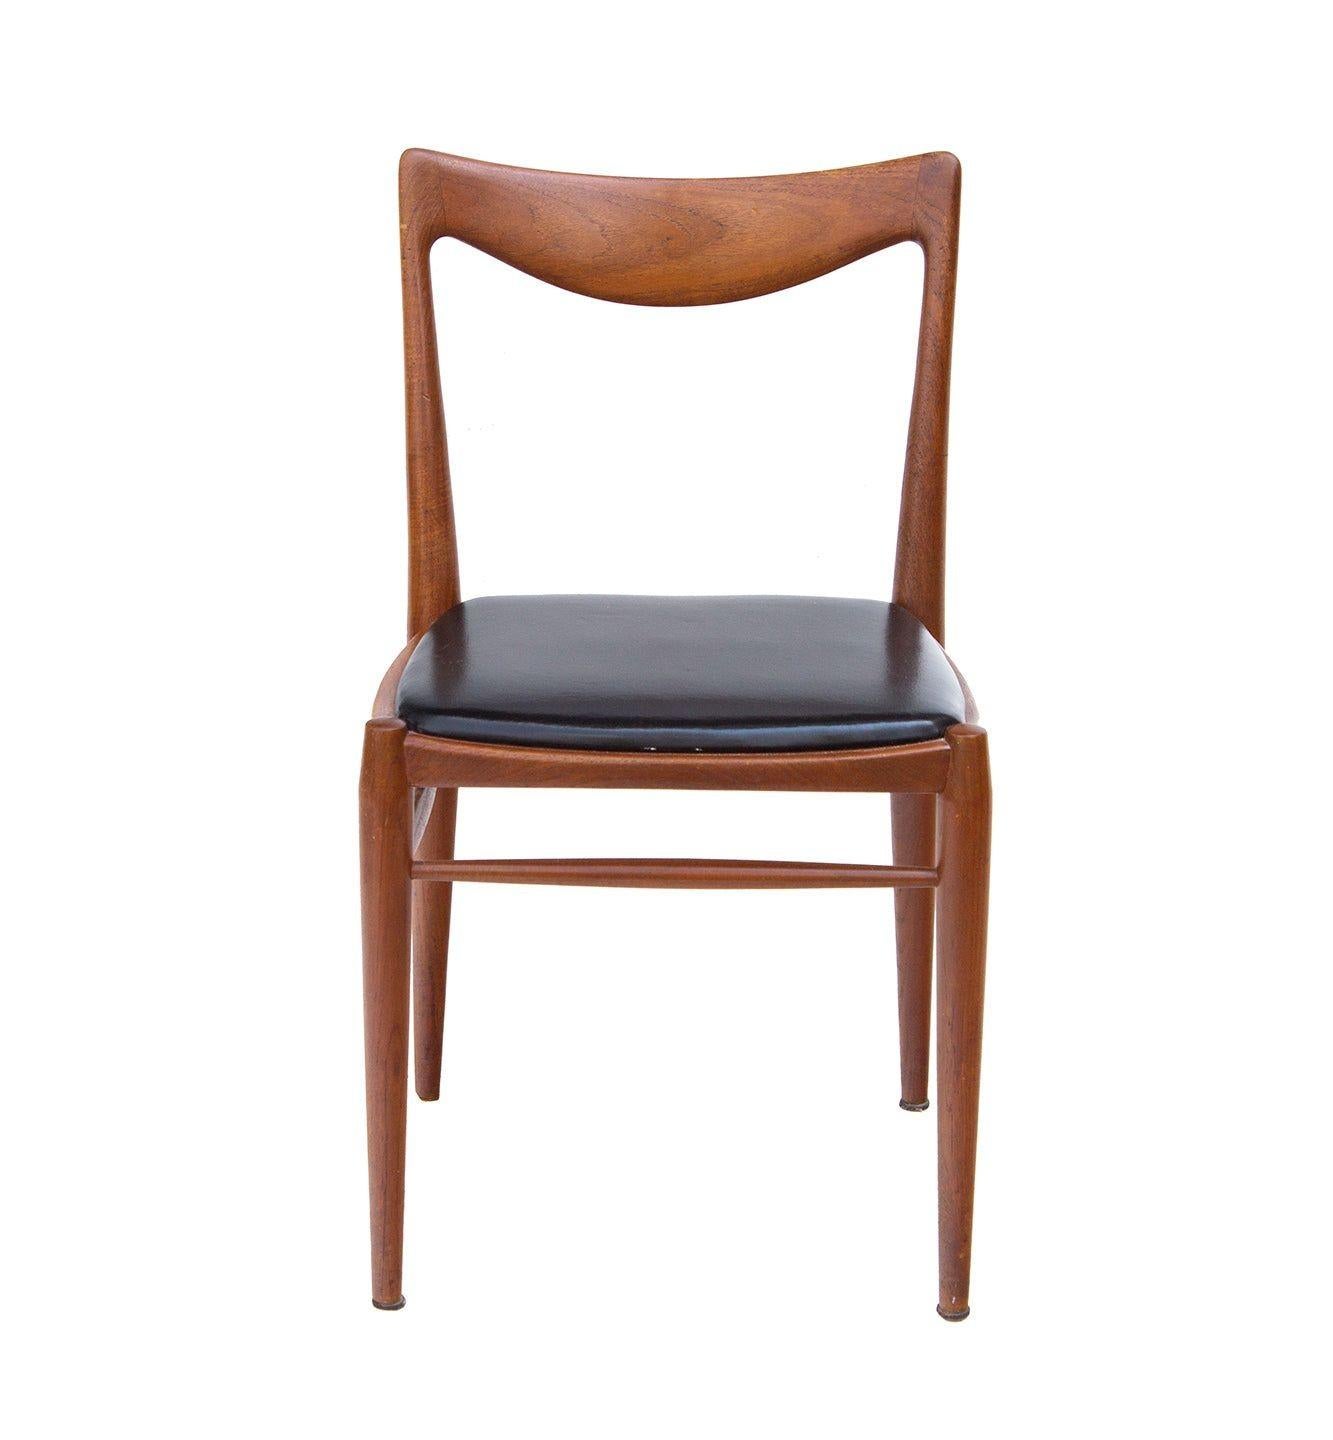 Norway, 1960s

Bambi Teak Dining Chair by Rolf Rastad & Adolf Relling for Gustav Bahus, Norway. 

CONDITION NOTES: One stretcher has broken off. Joints have been glued and braced. Full service recommended. 

DIMENSIONS: 18